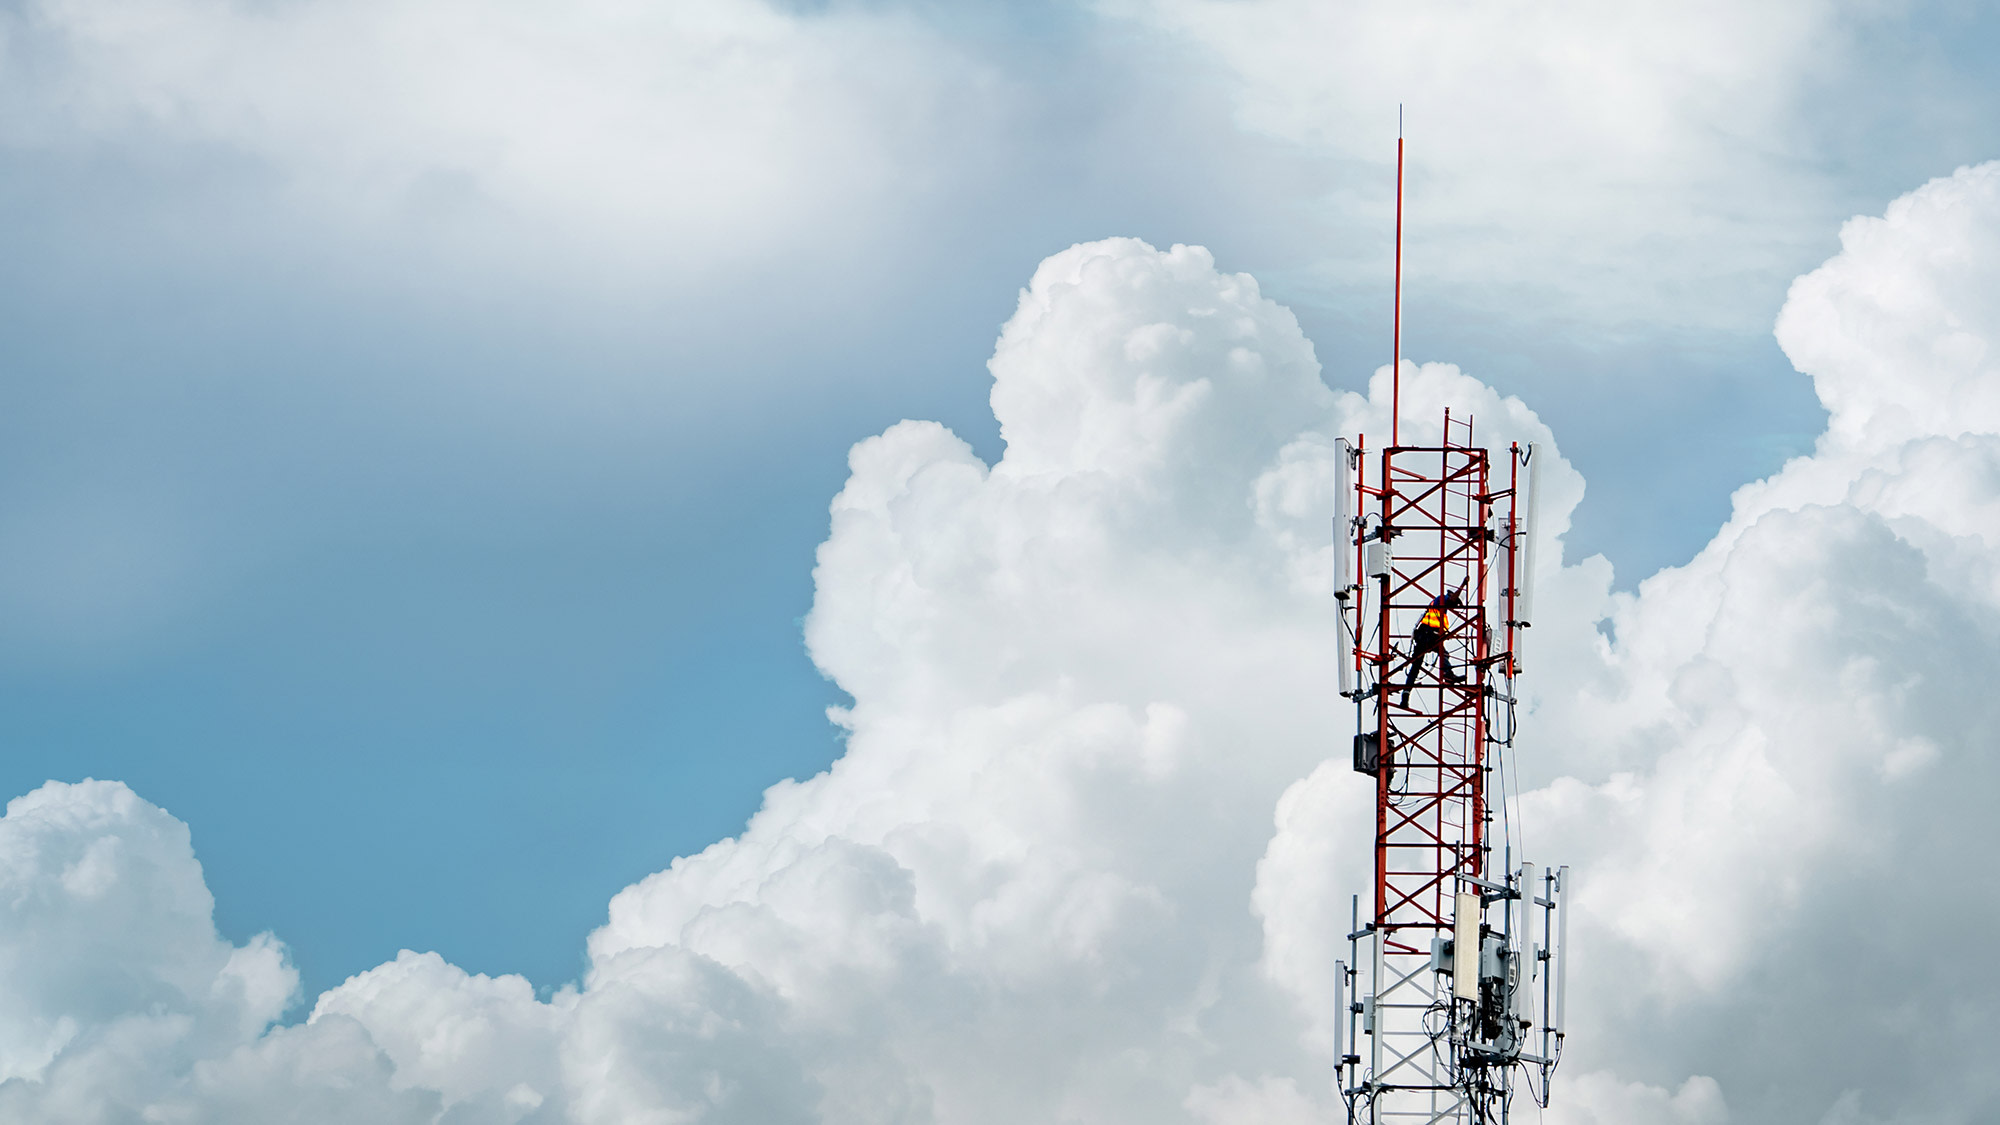 A man is standing on a cell tower towering against clouds in the blue sky. We explain how politicians, authorities and operators are expanding the new 5G technology.